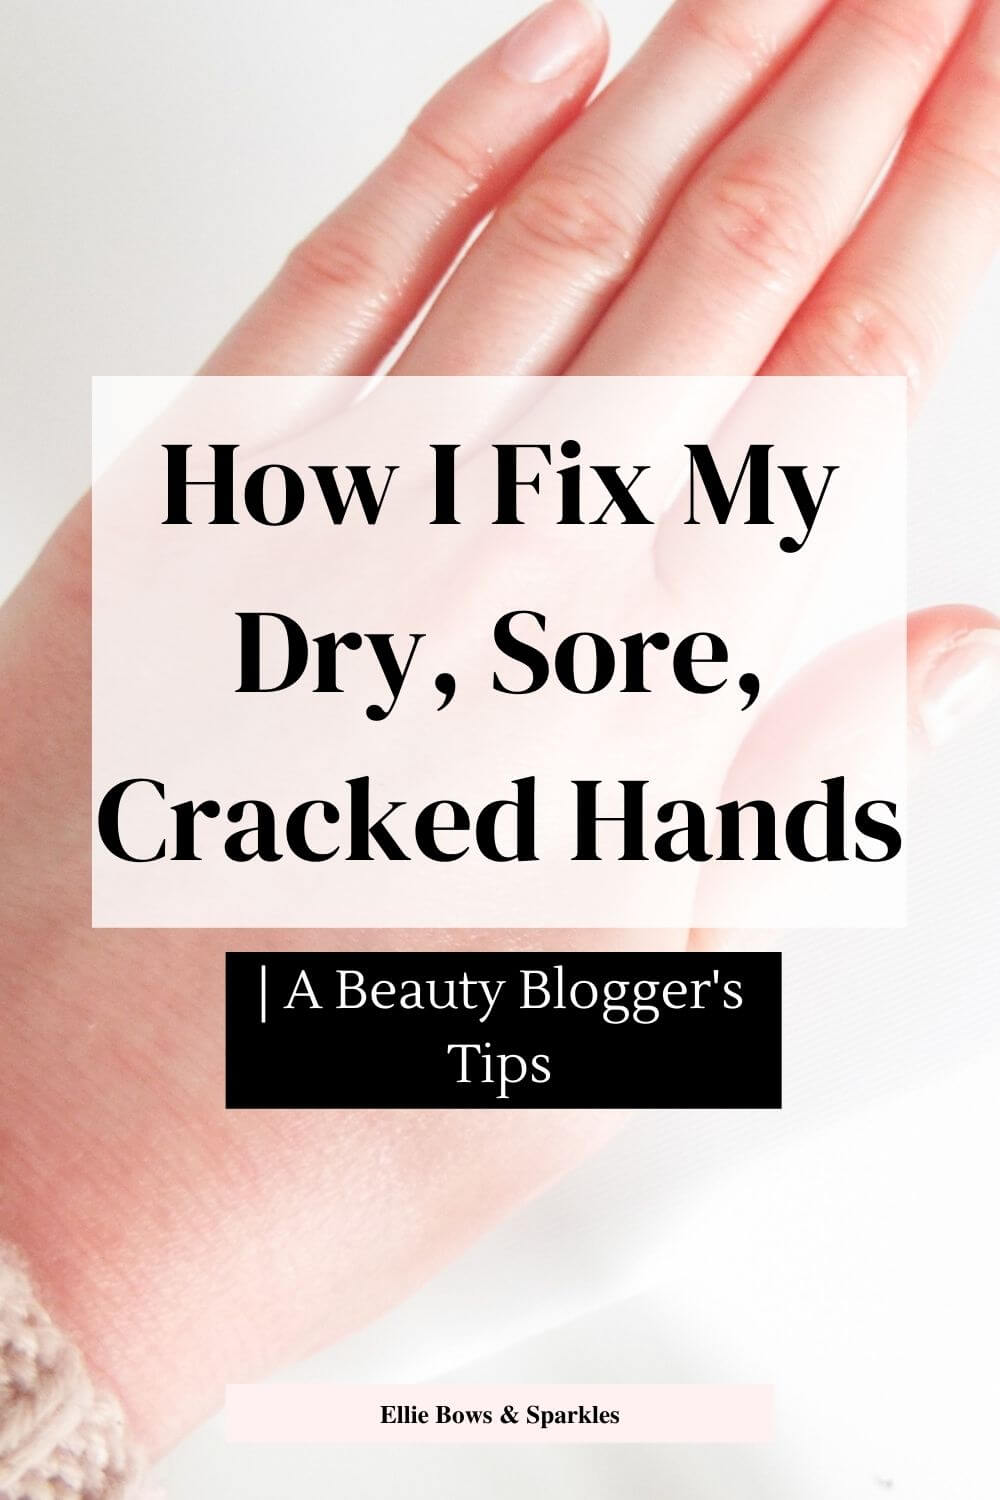 Pinterest pin, featuring picture of my red, dry hands in the background, with white translucent title card and black, bold text reading "How I Fix My Dry, Sore, Cracked Hands" and black box below, with white font reading "| A Beauty Blogger's Tips".